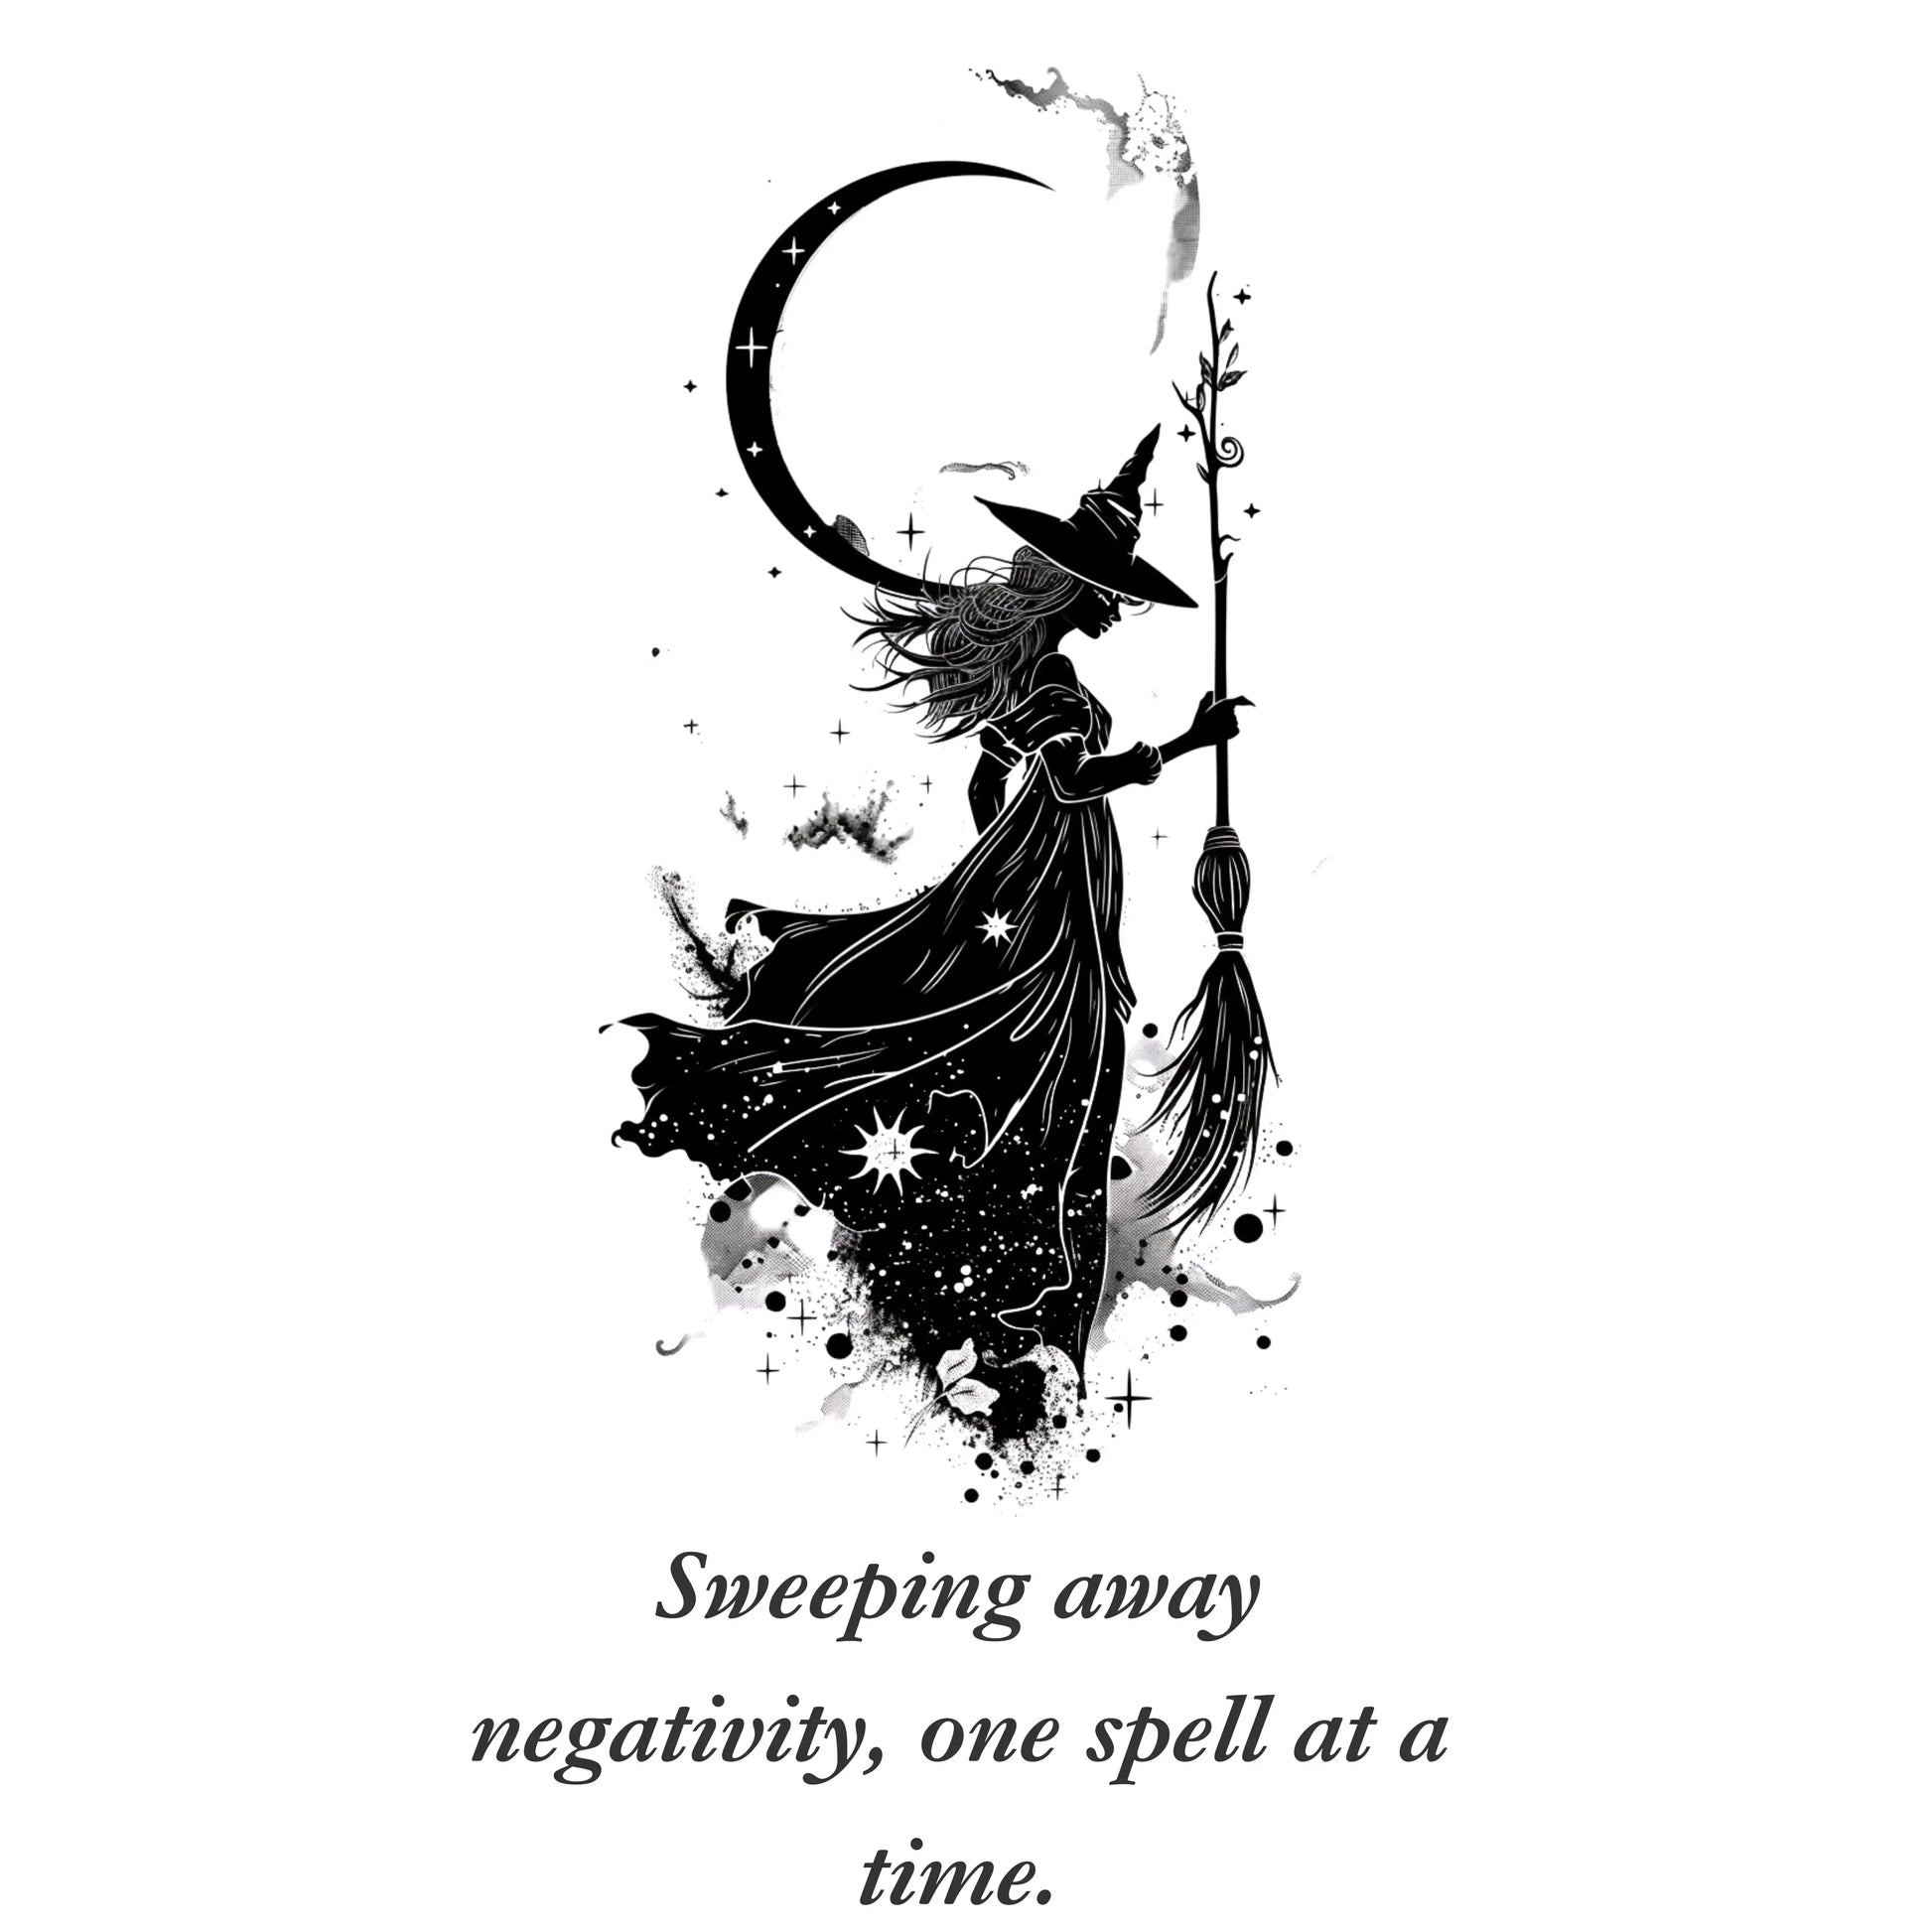 Sweeping away negativity one spell at a time graph. graphic design from BLK Moon shop.